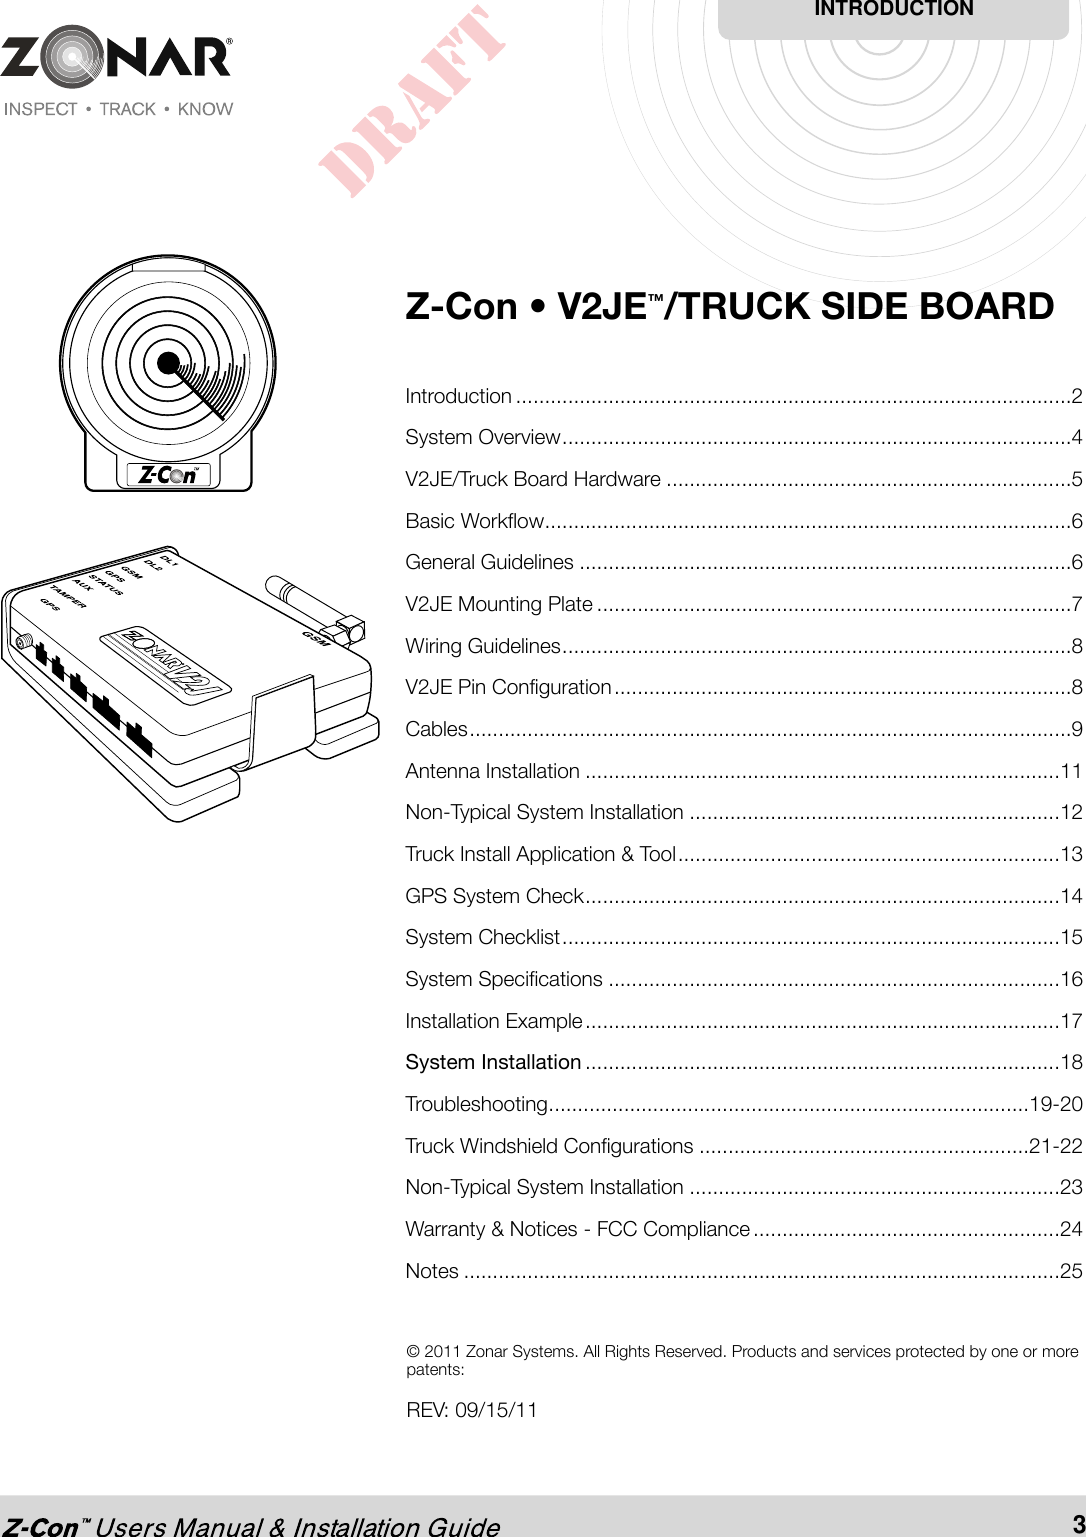 Z-Con • V2JE™/TRUCK SIDE BOARDIntroduction ................................................................................................2System Overview........................................................................................4V2JE/Truck Board Hardware ......................................................................5Basic Workflow...........................................................................................6General Guidelines .....................................................................................6V2JE Mounting Plate ..................................................................................7Wiring Guidelines........................................................................................8V2JE Pin Configuration...............................................................................8Cables........................................................................................................9Antenna Installation ..................................................................................11Non-Typical System Installation ................................................................12Truck Install Application &amp; Tool..................................................................13GPS System Check..................................................................................14System Checklist......................................................................................15System Specifications ..............................................................................16Installation Example..................................................................................17System Installation ..................................................................................18Troubleshooting...................................................................................19-20Truck Windshield Configurations .........................................................21-22Non-Typical System Installation ................................................................23Warranty &amp; Notices - FCC Compliance.....................................................24Notes .......................................................................................................25INTRODUCTION3© 2011 Zonar Systems. All Rights Reserved. Products and services protected by one or morepatents:REV: 09/15/11